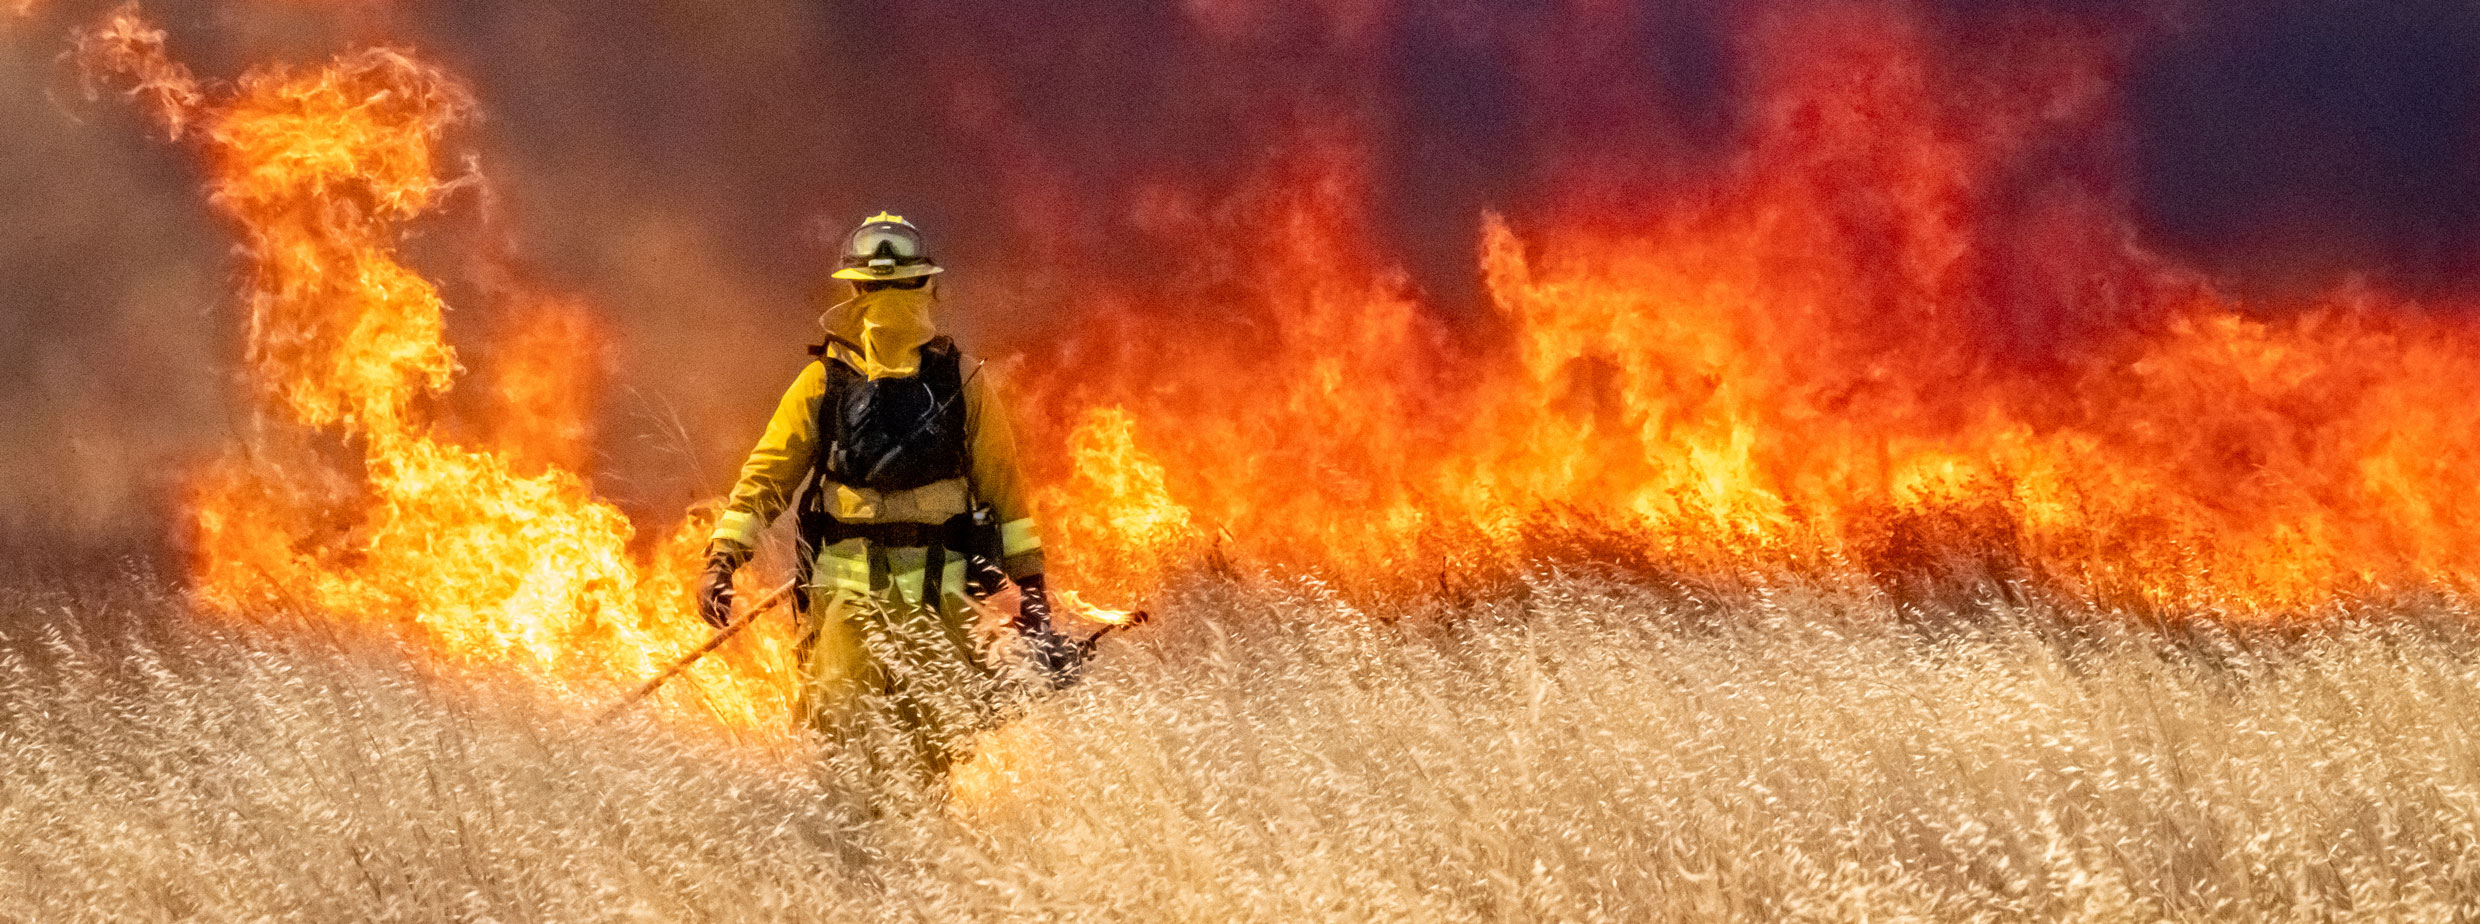 Firefighter stares down wildfire